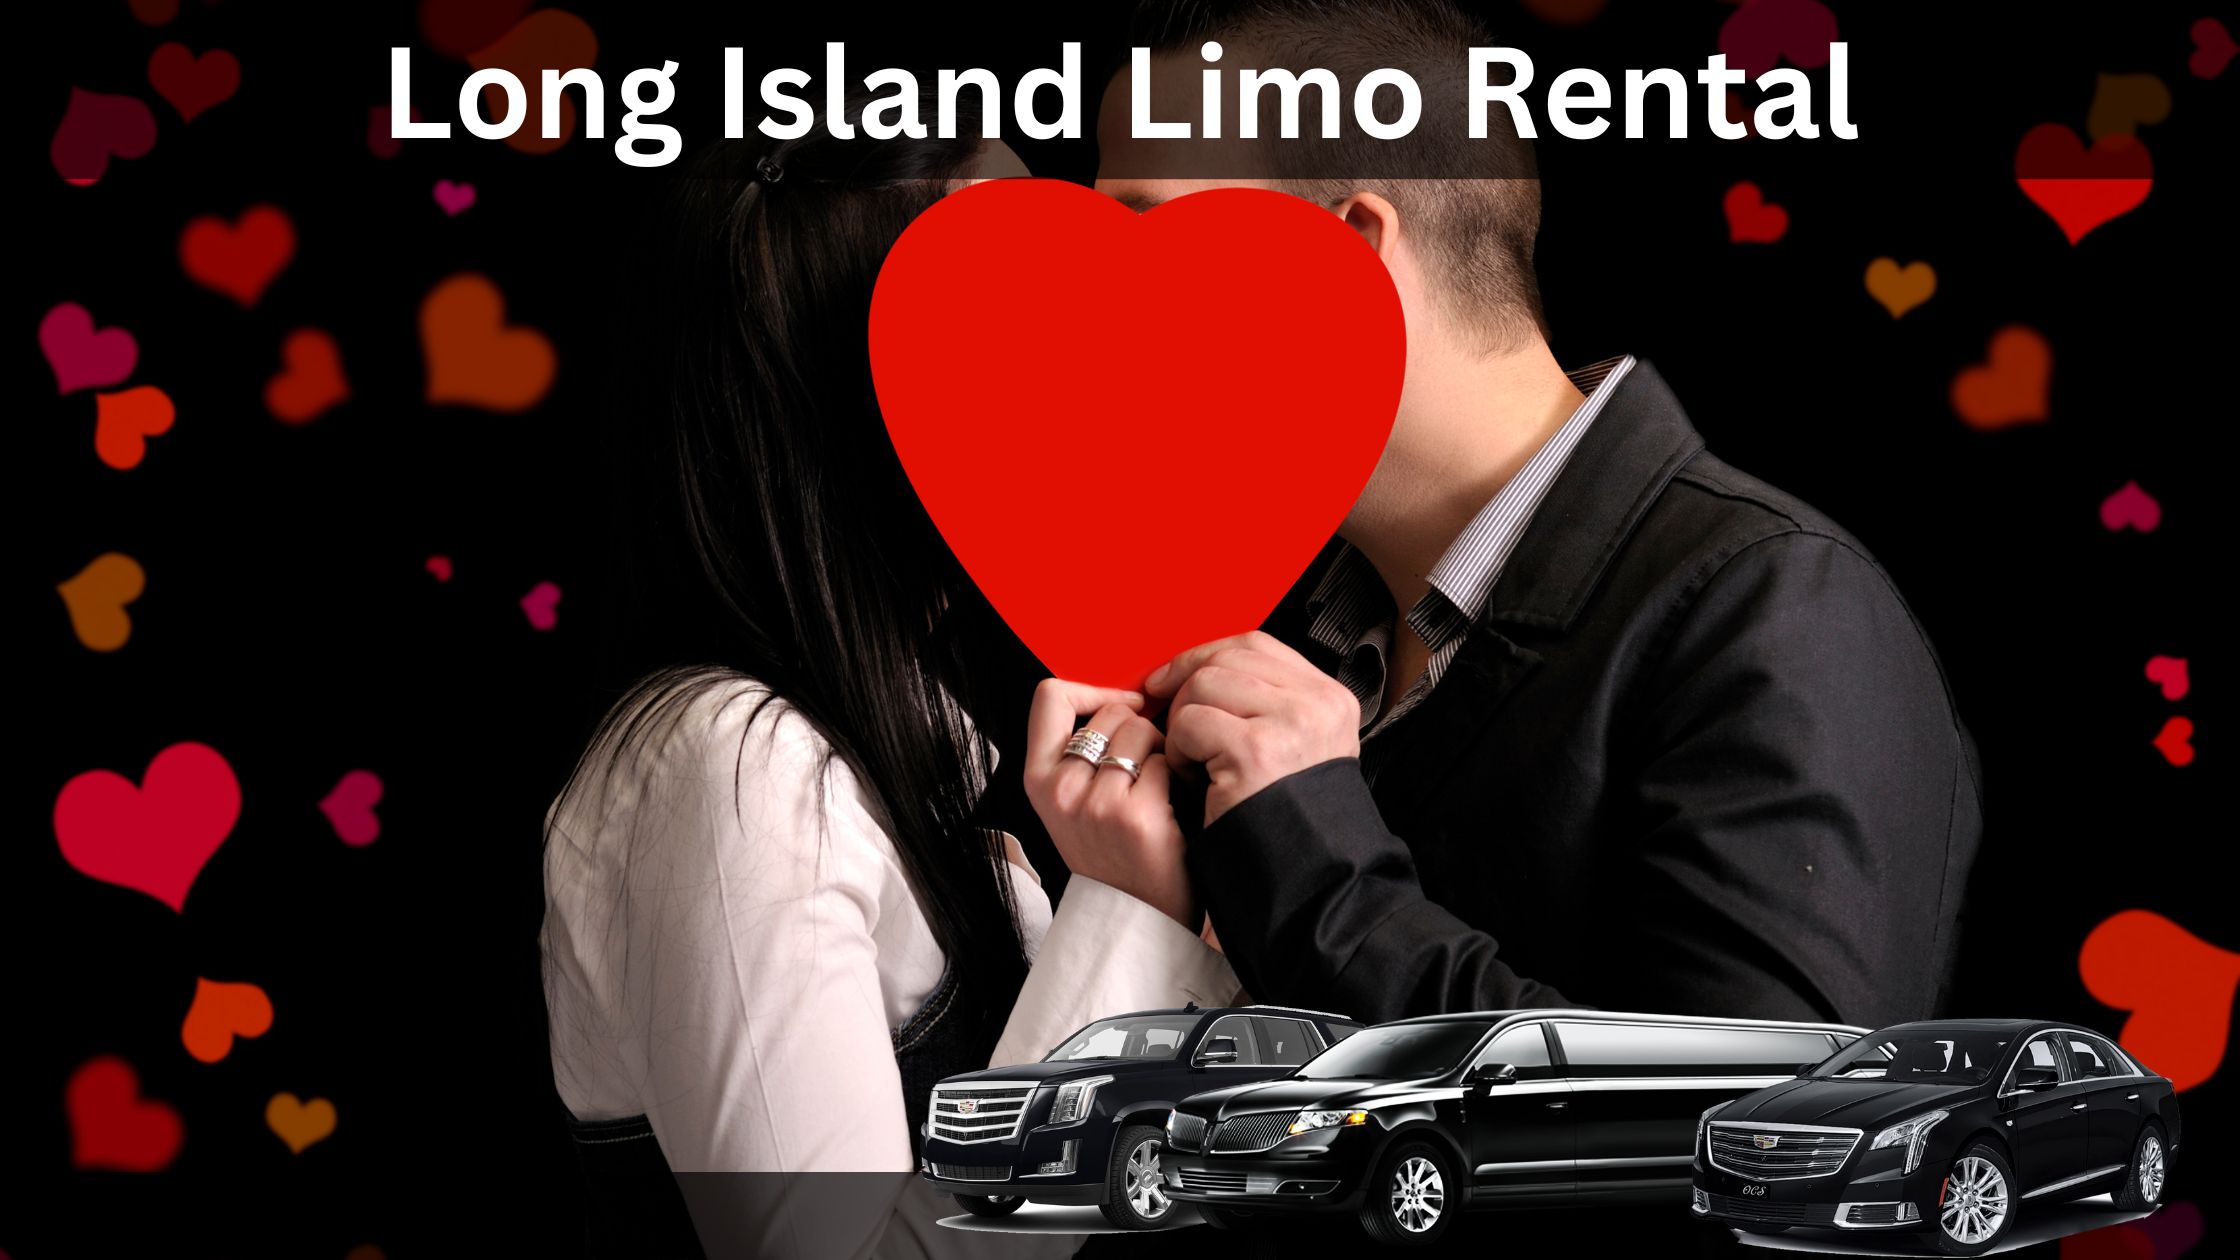 Valentine’s Day Limo Service in Long Island, NY | Long Island Limo Rental